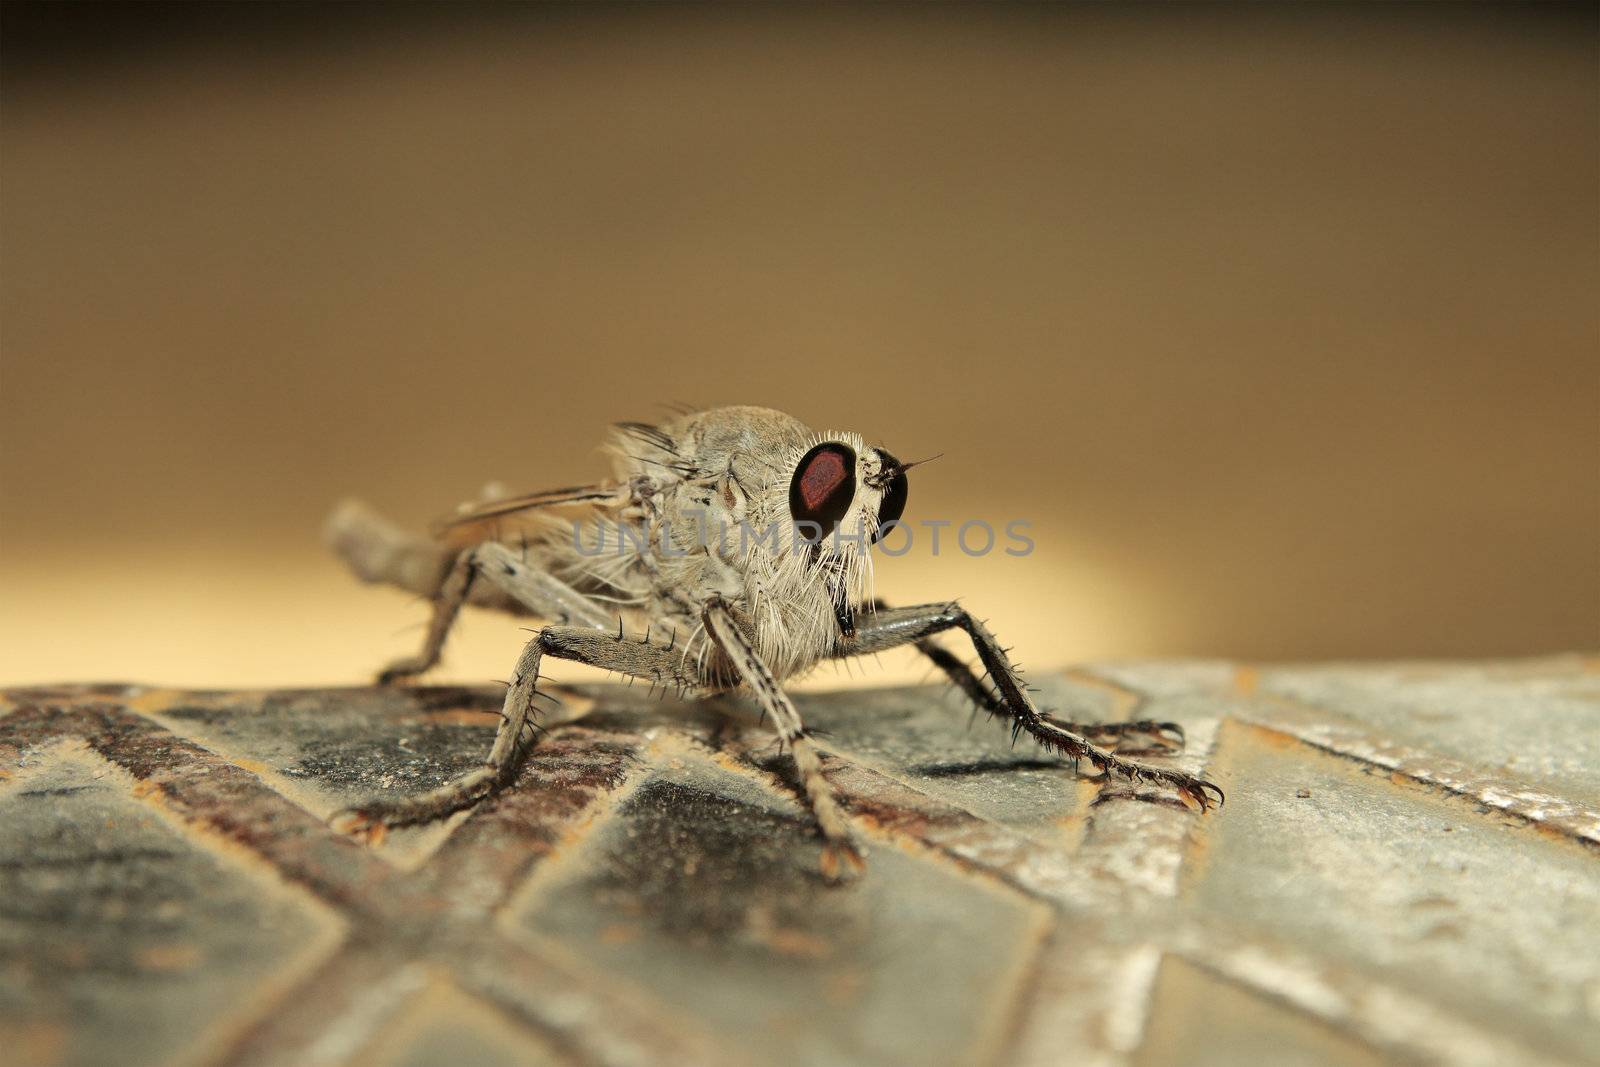 Shaggy insect with large eyes, sits on an iron stair.